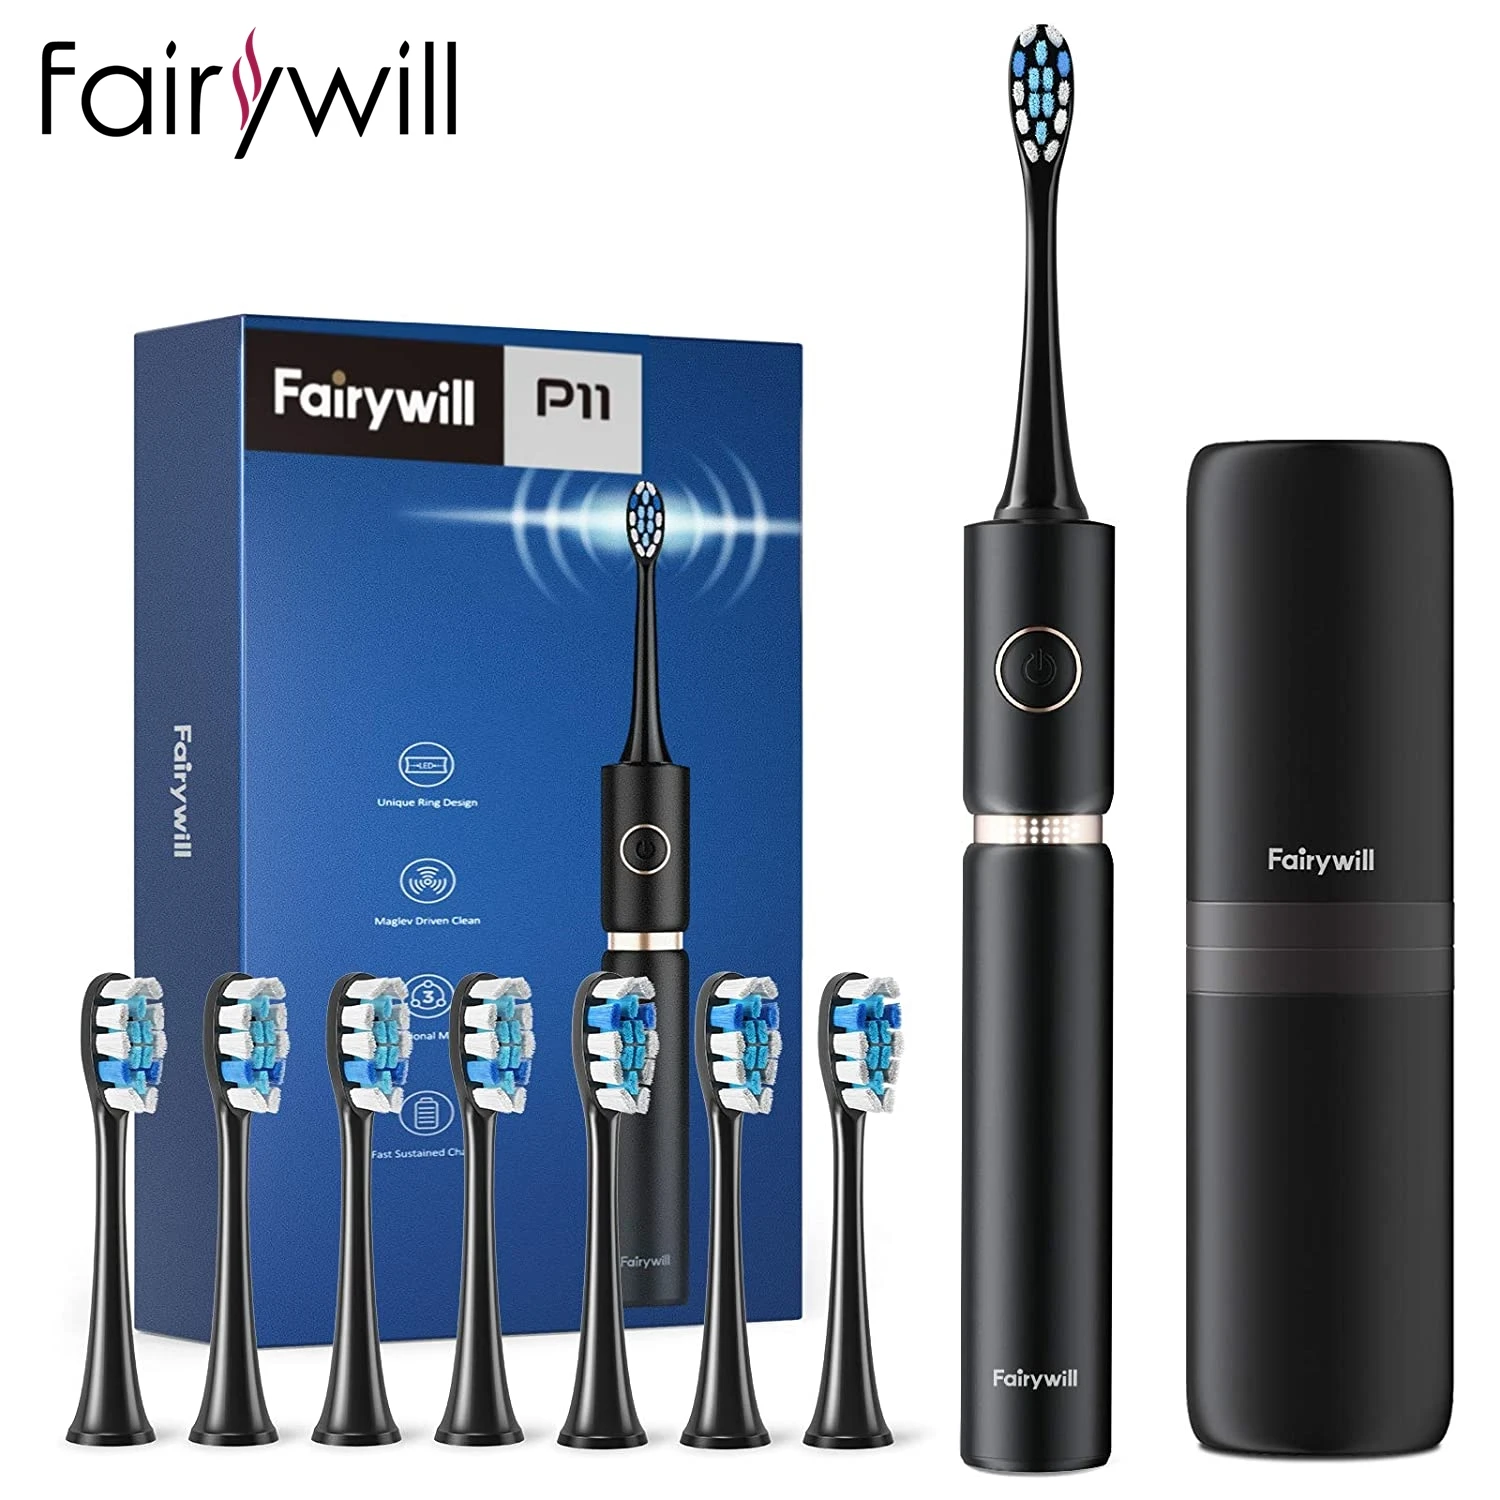 Fairywill P11 Sonic Electric Toothbrush Whitening Rechargeable Ultra Powerful USB Charger Waterproof 4 Heads and 1 Travel Case